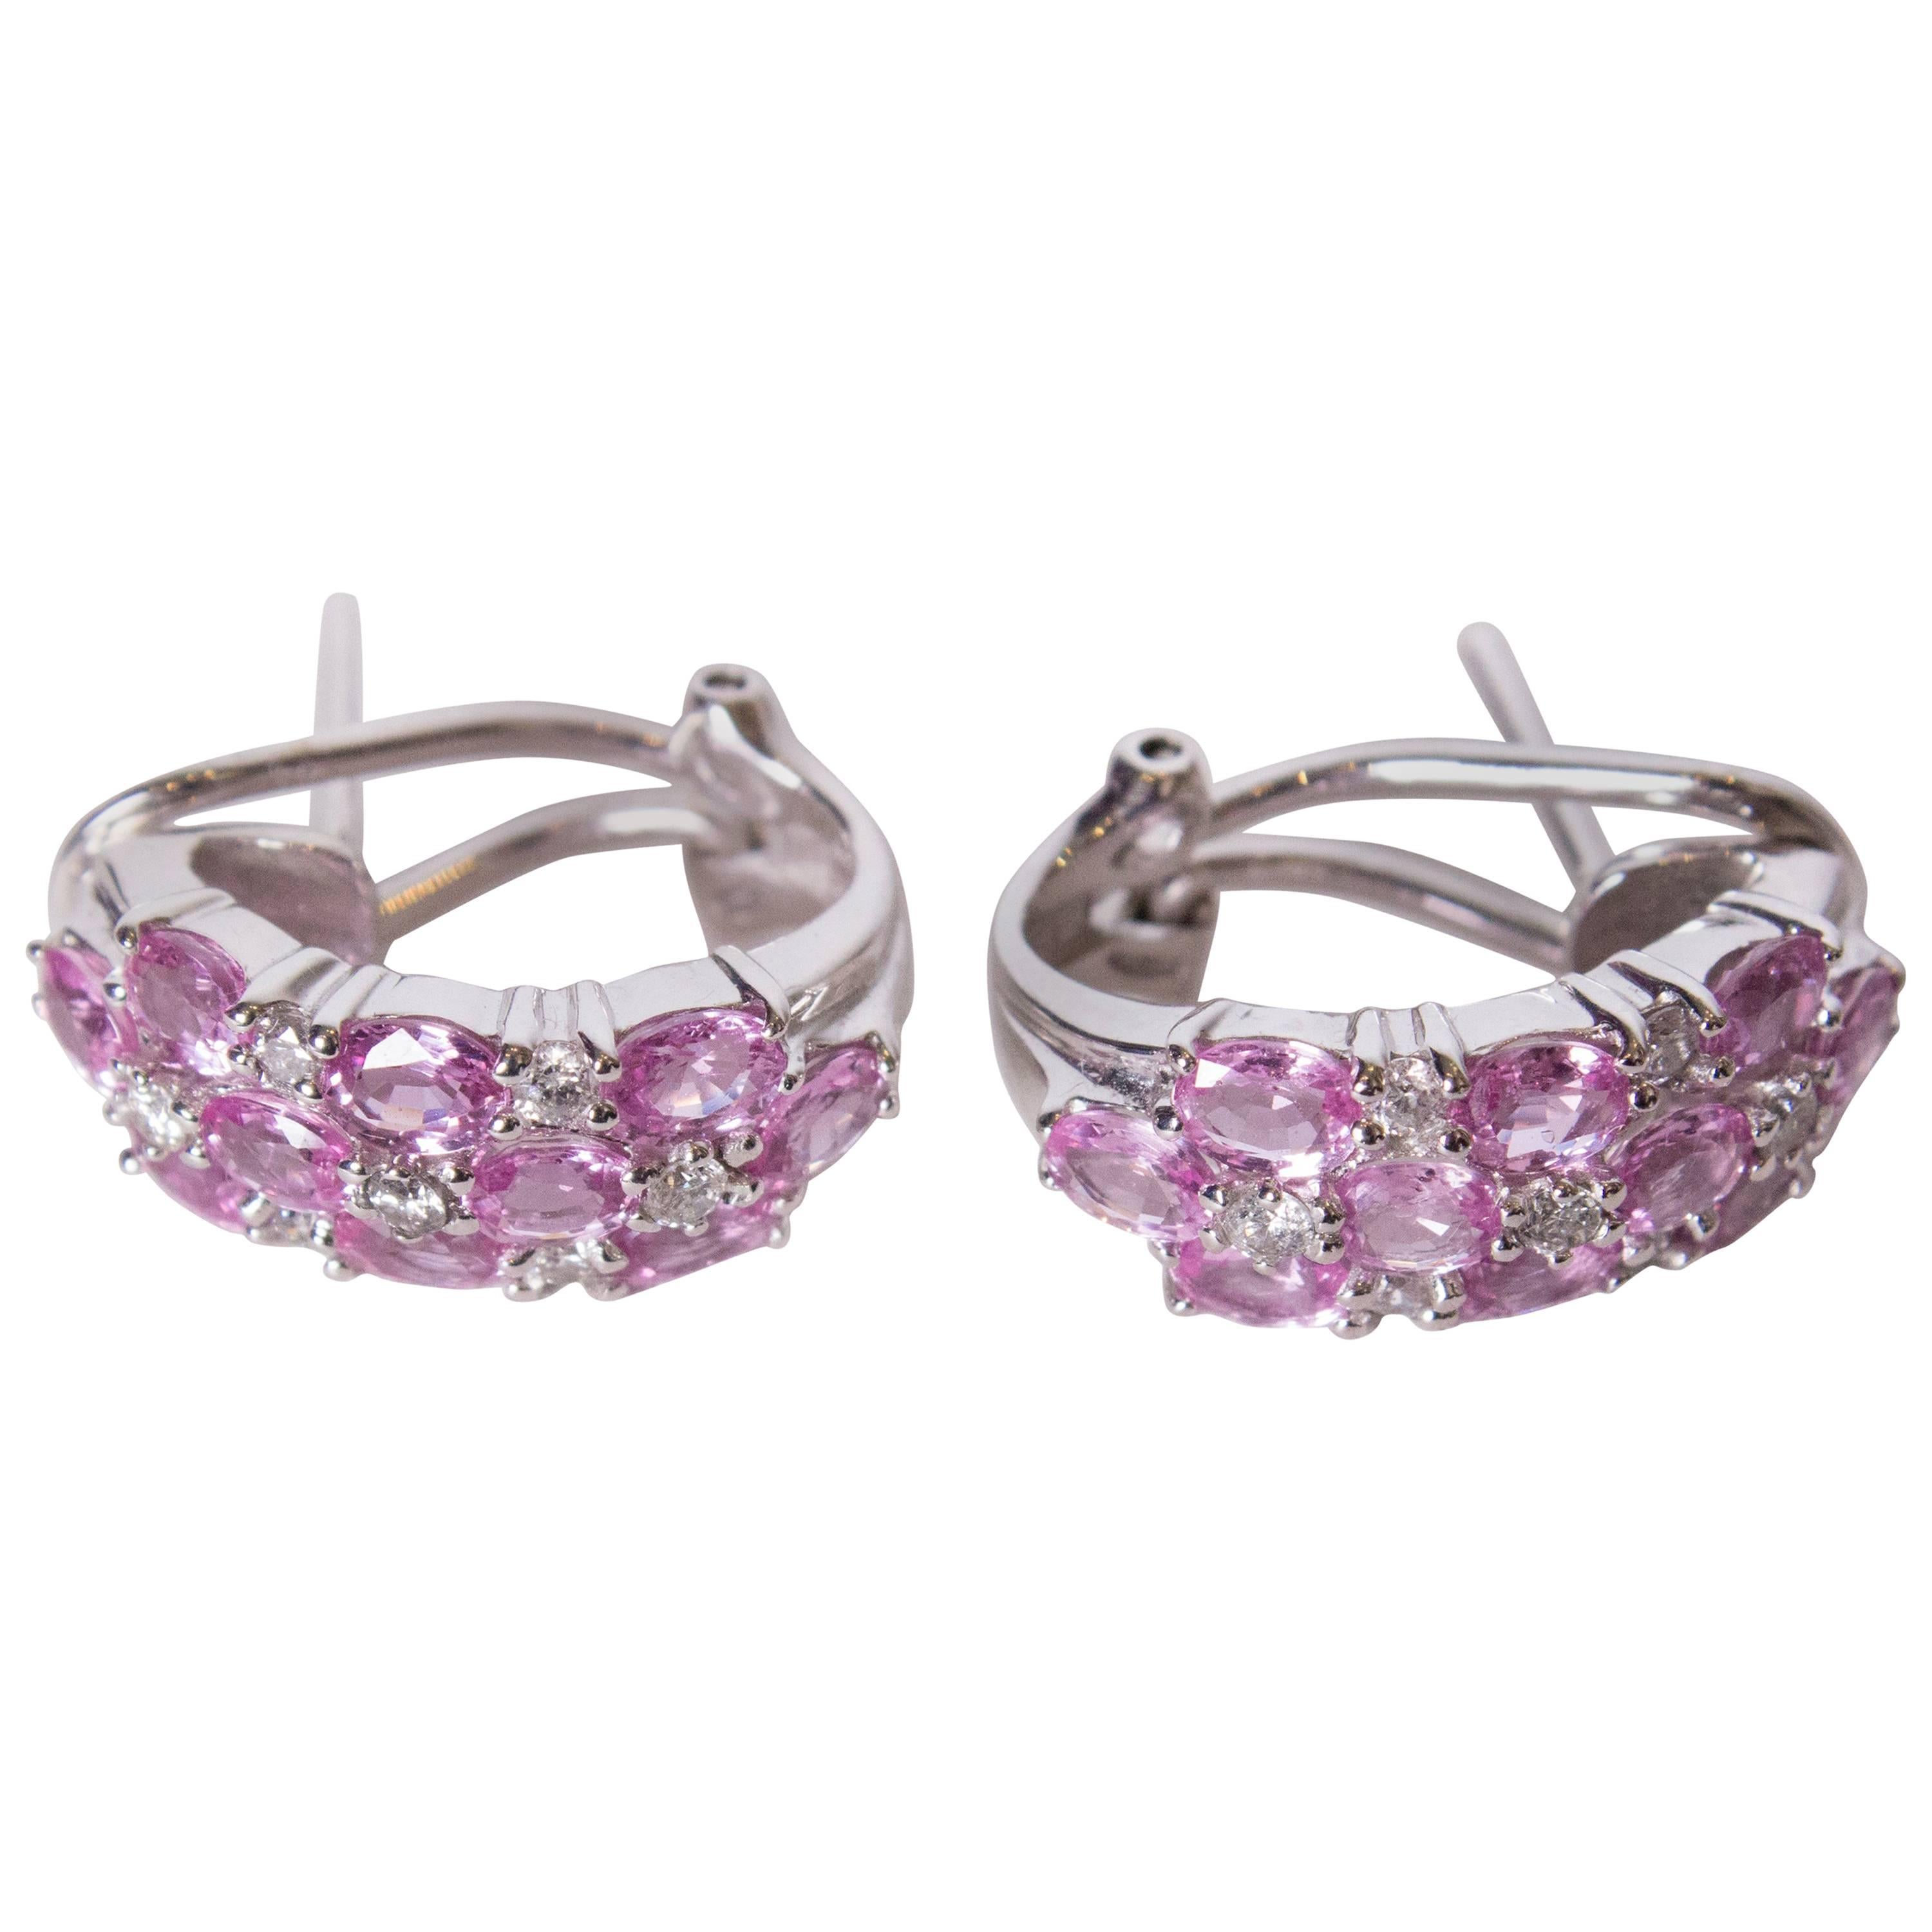 Vintage Pink Sapphire and Diamond Earrings on White Gold